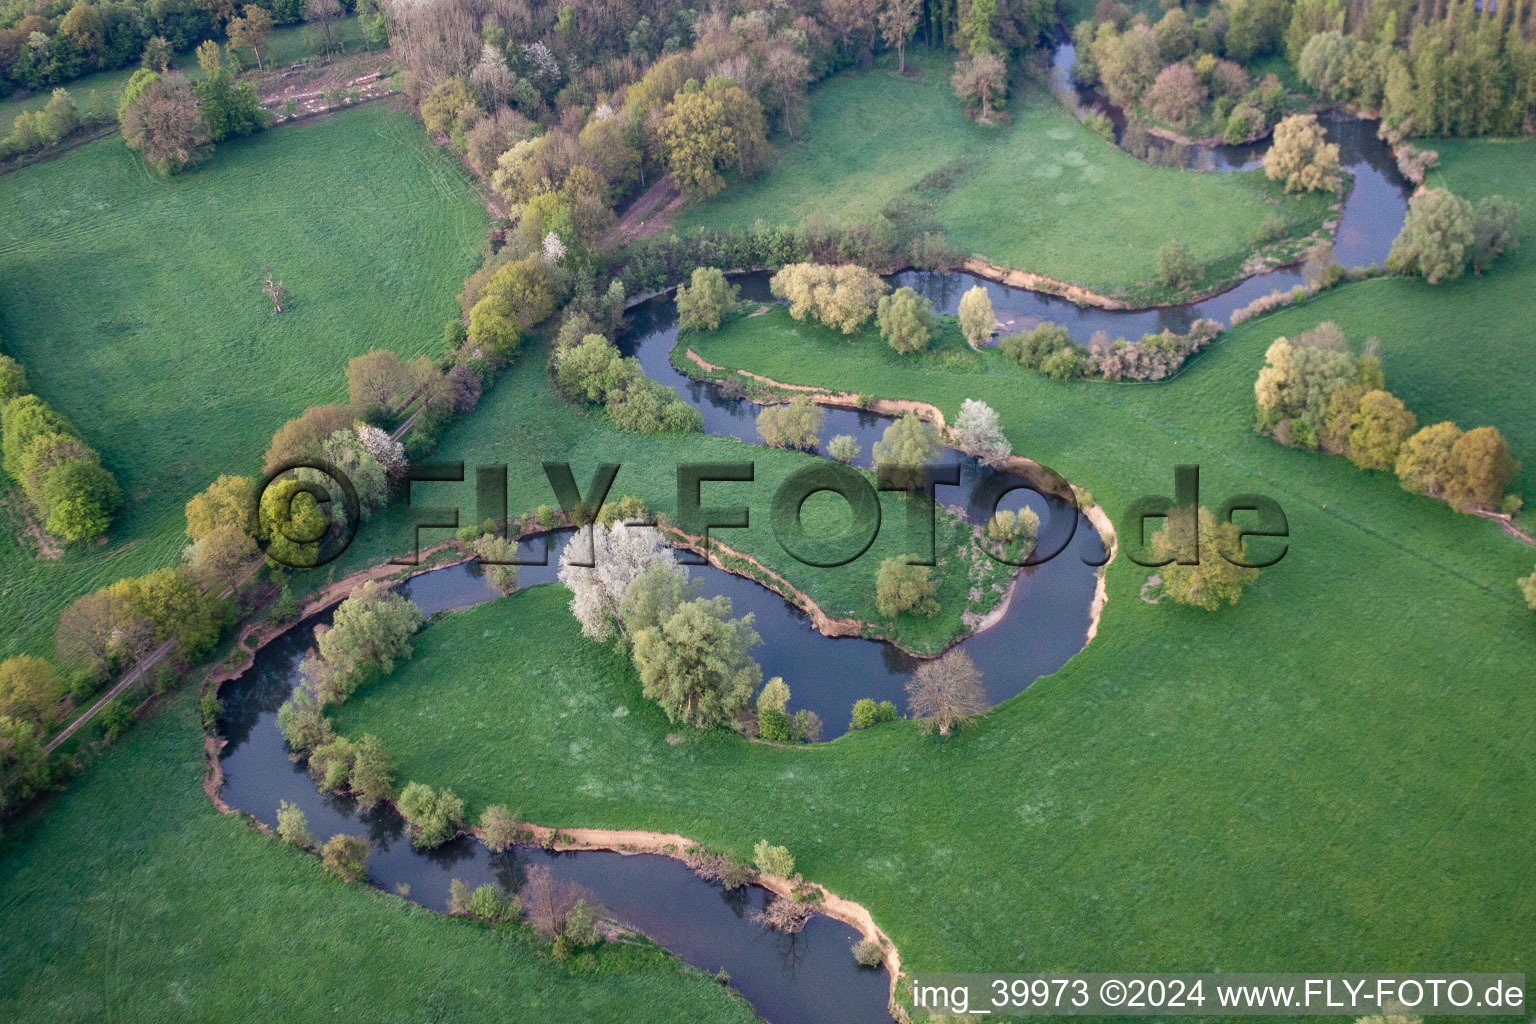 Curved loop of the riparian zones on the course of the river Oise in Chigny in Hauts-de-France, France